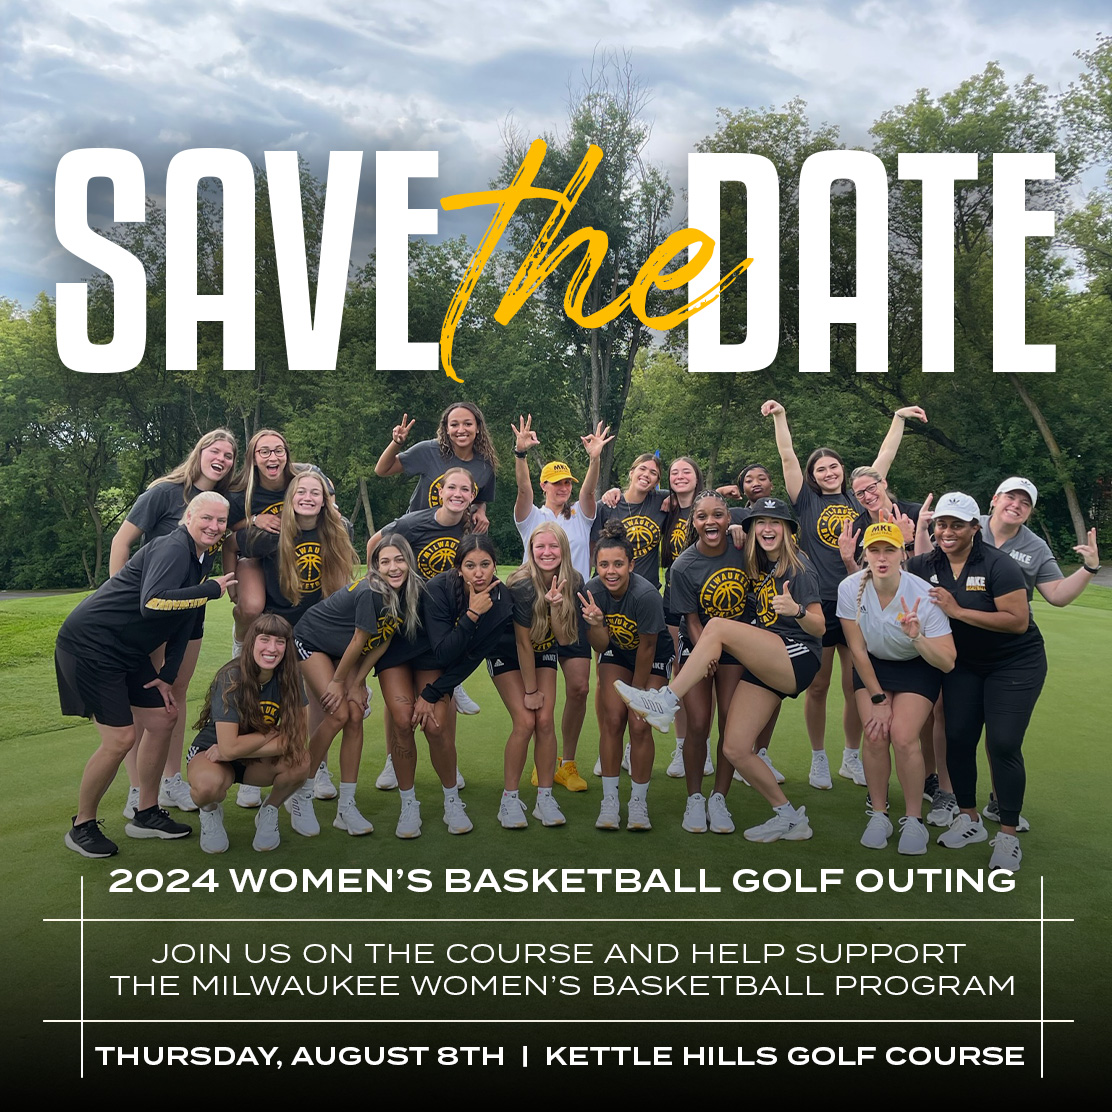 𝗠𝗮𝗿𝗸 𝗬𝗼𝘂𝗿 𝗖𝗮𝗹𝗲𝗻𝗱𝗮𝗿𝘀! 📅 The 2024 Women's Basketball Golf Outing is Thursday, August 8! 🏌️‍♀️ We'll have more information about registration, hole sponsorship and more in the coming weeks! #ForTheMKE